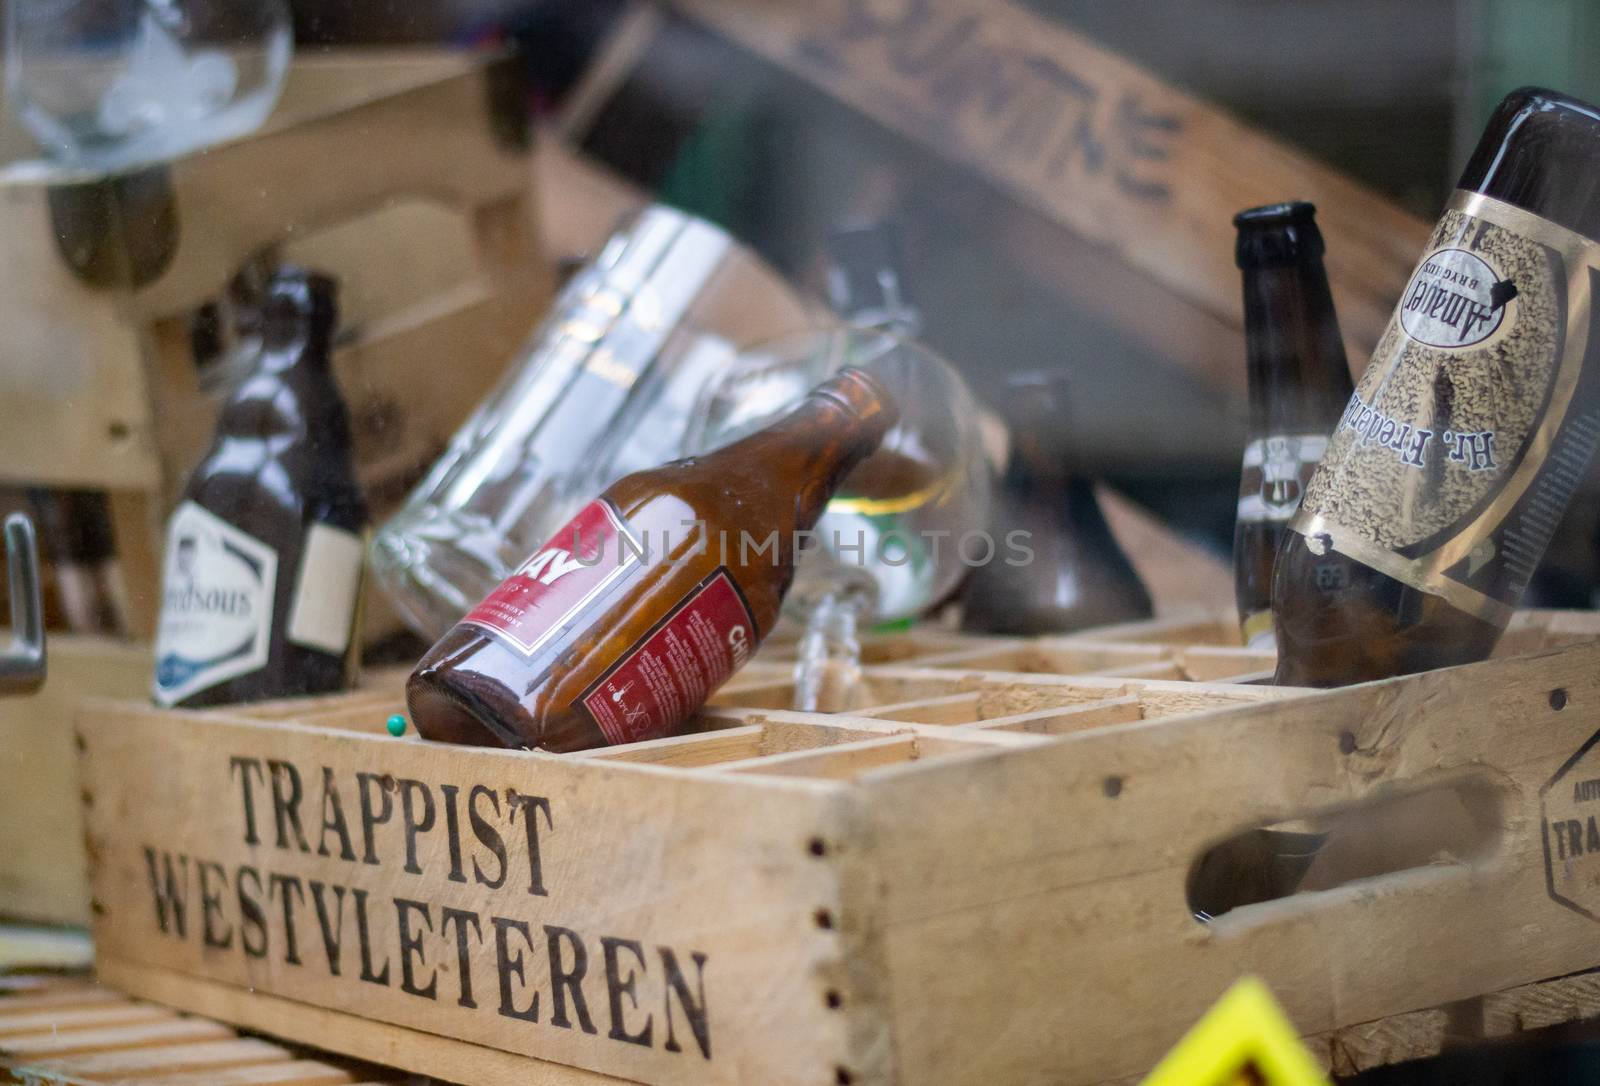 Budapest, Hungary, March 2013: Illustrative Editorial: Belgian beer in a trappist Westvleteren crate on display